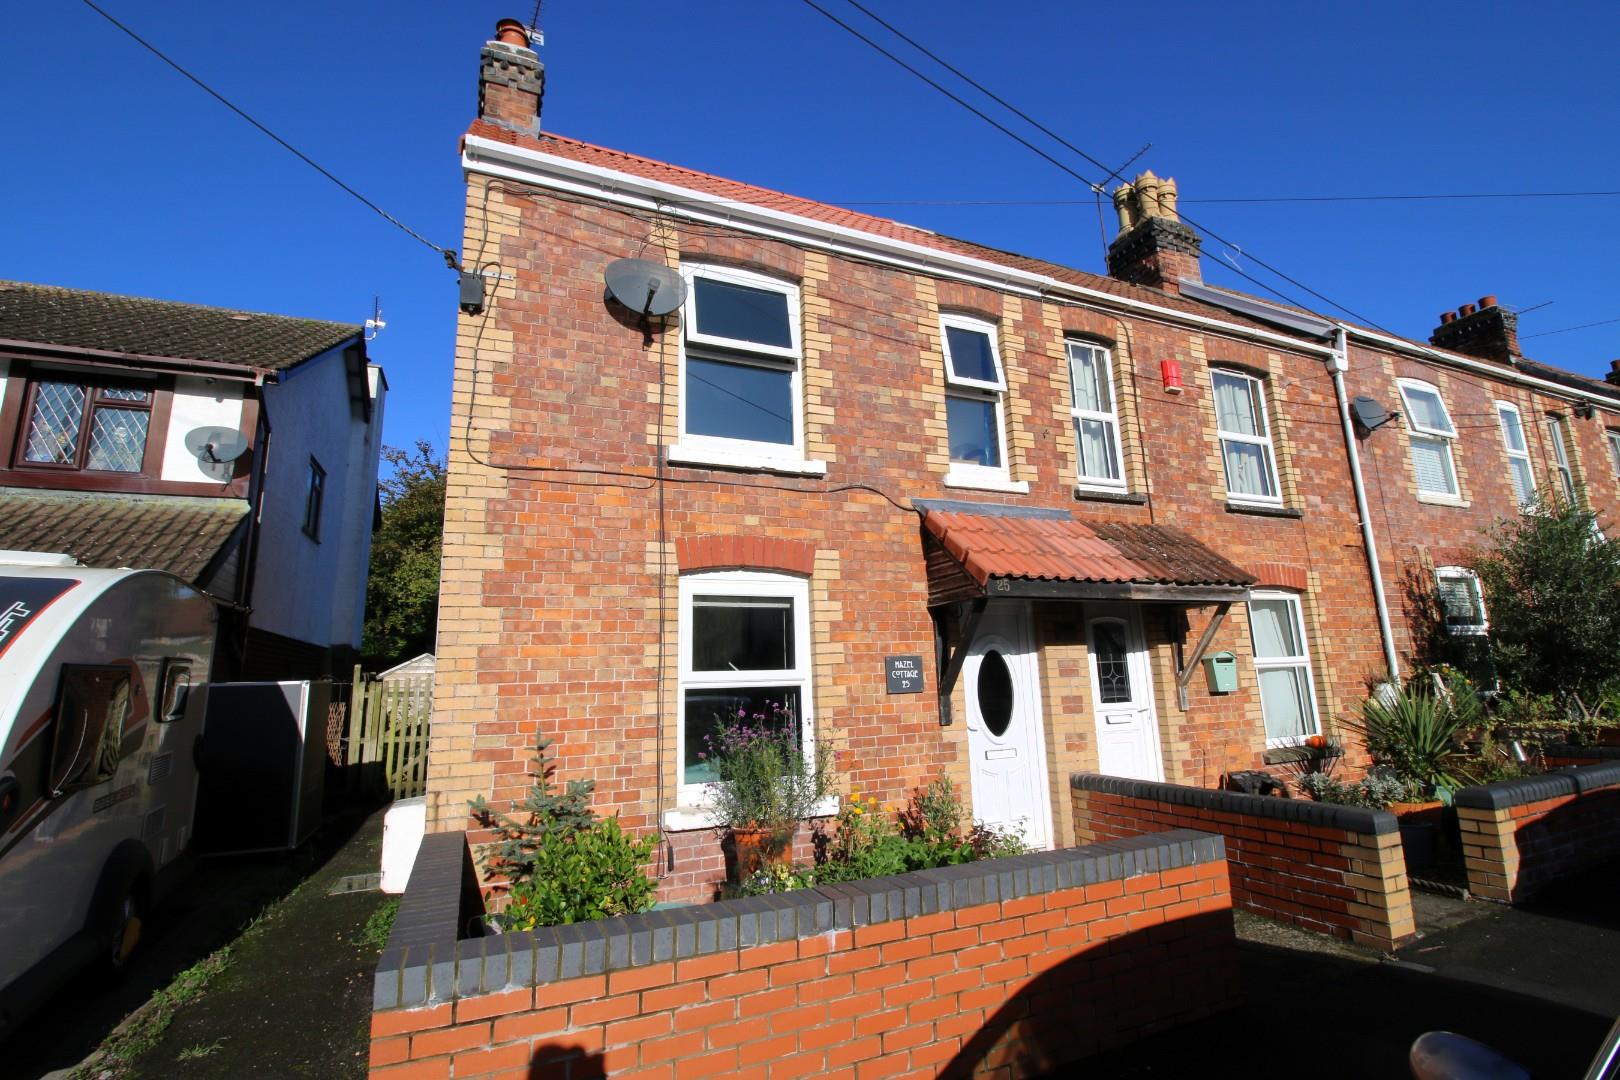 Beautiful Victorian home within walking distance of Yatton's mainline railway station